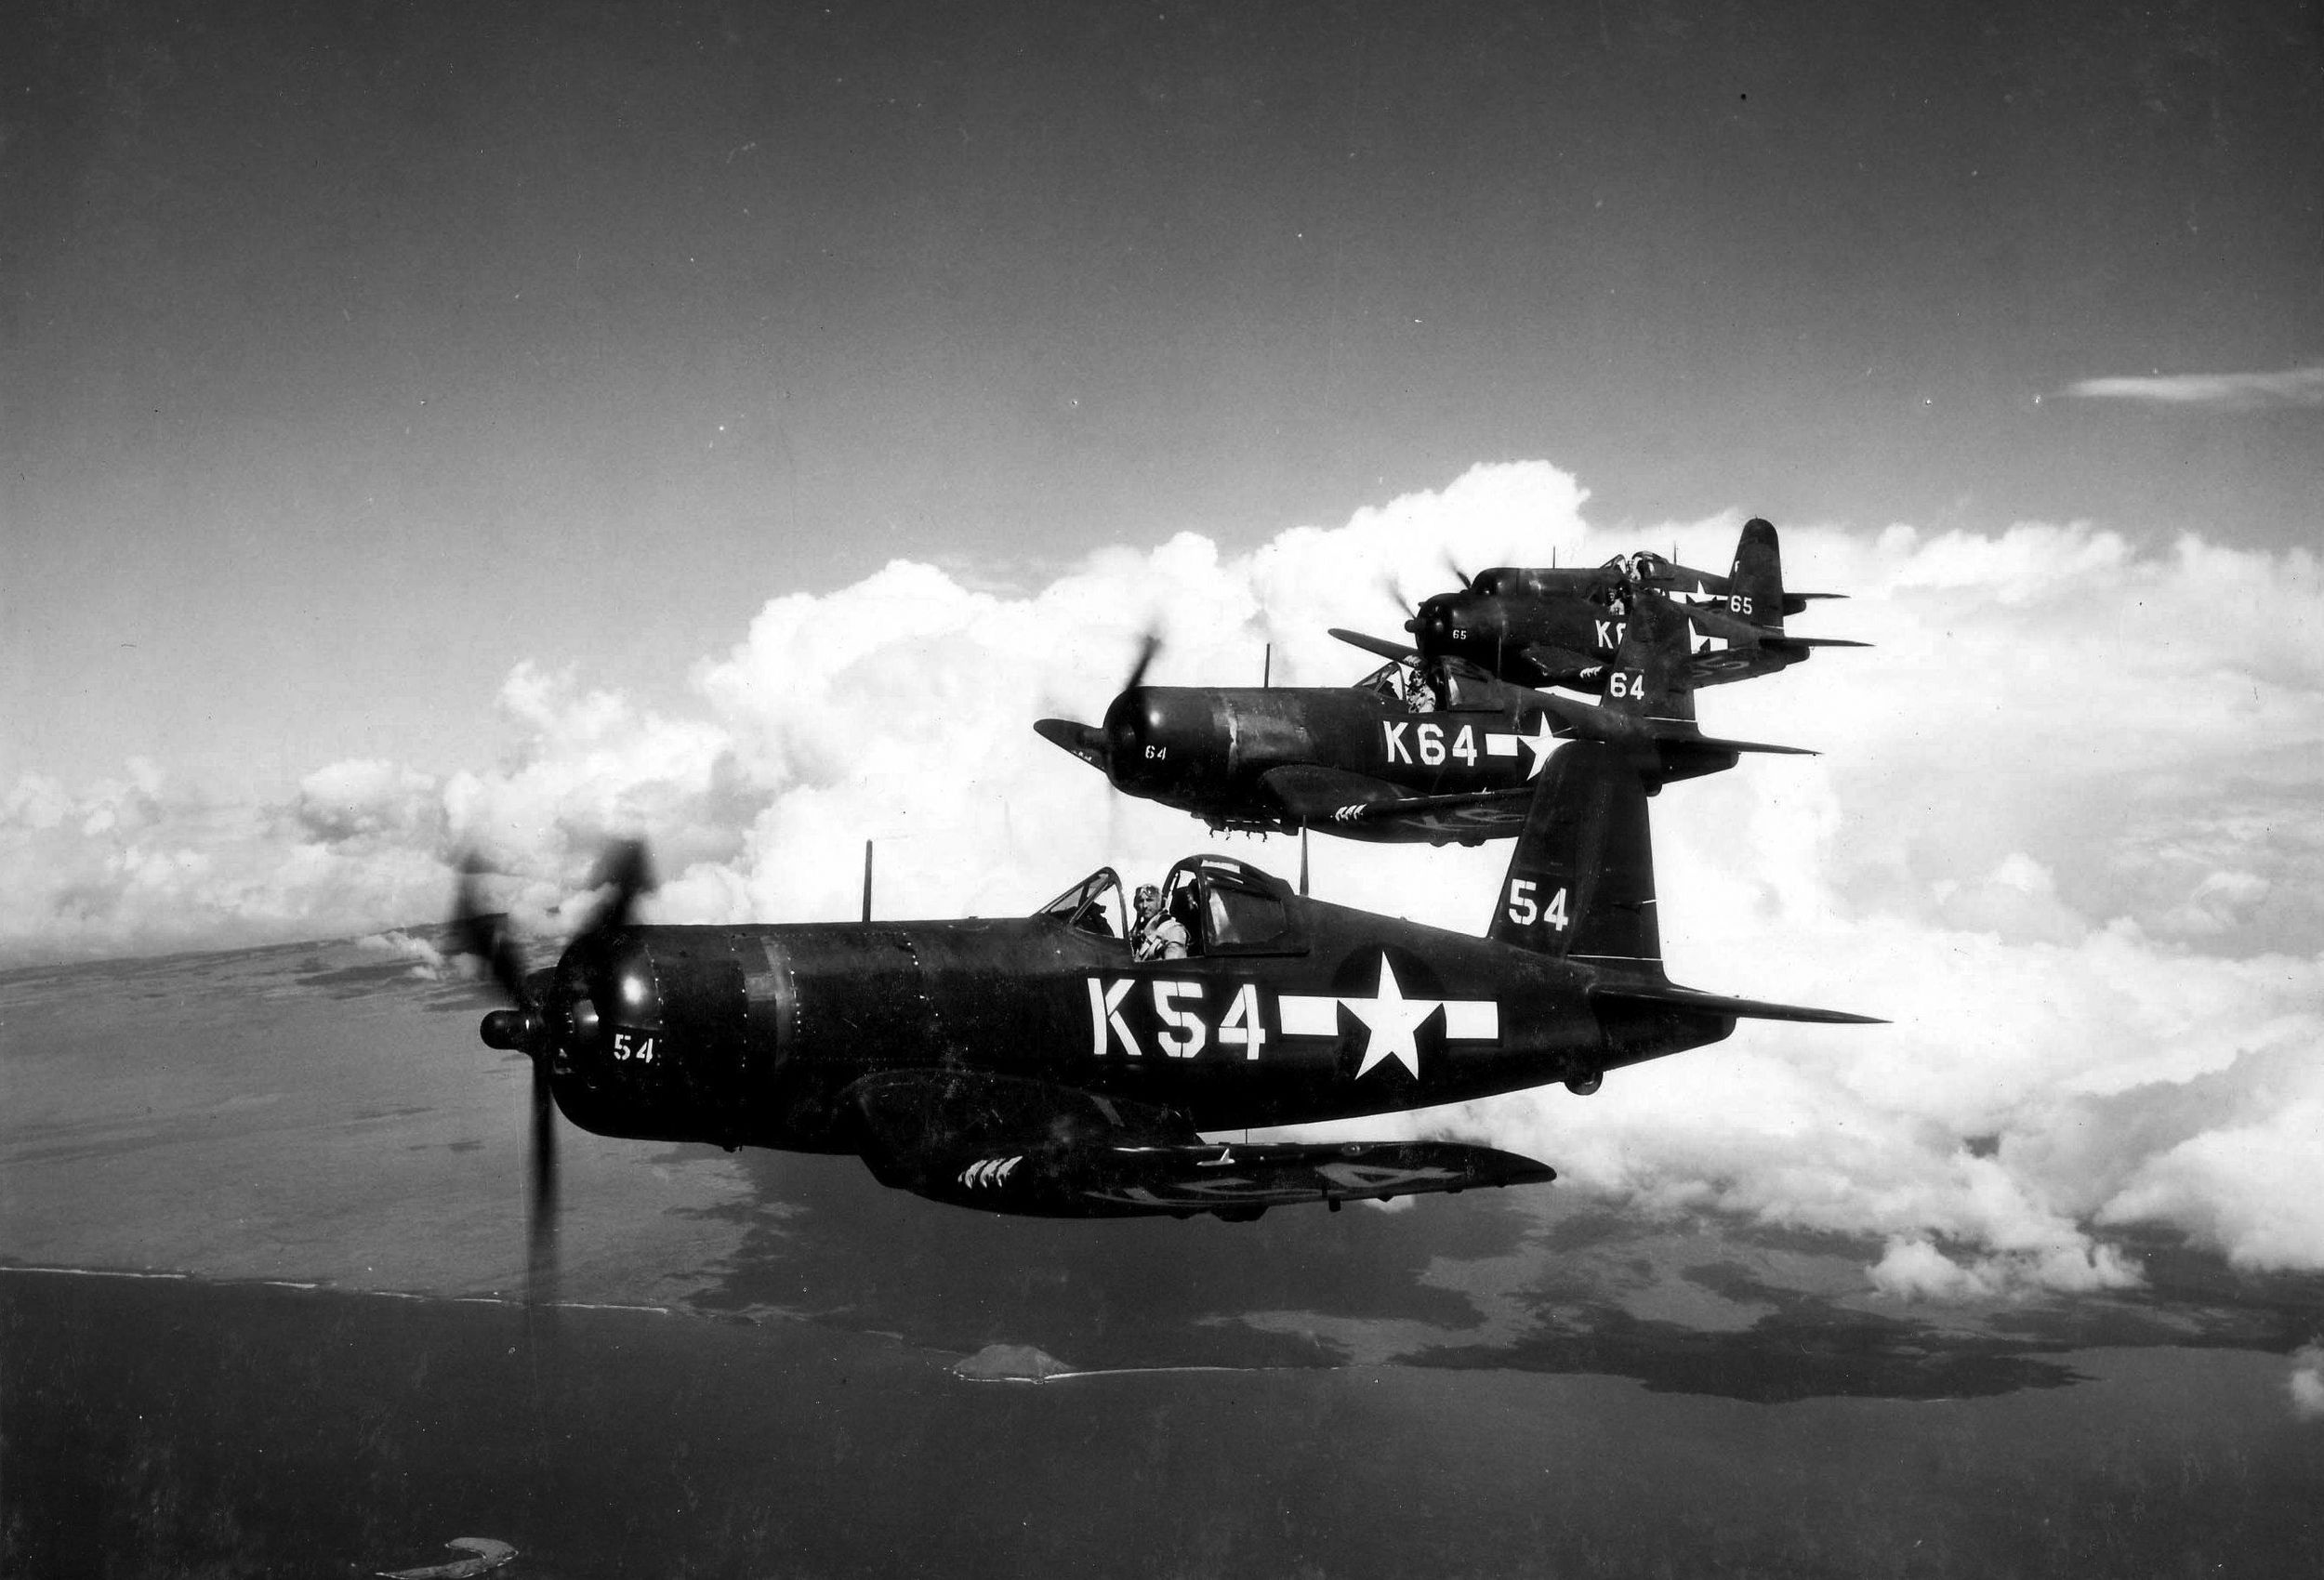 At Naval Air Station Anacostia, D.C., test pilot Frederick Trapnell flew the Vought XF4U-1 Corsair to a then-U.S. record 402 mph. He then suggested changes to make it a better combat aircraft. The redesigned Corsair became a pilot favorite and achieved an 11-1 kill ratio in World War II. It remained in production for 11 years through four wars. 